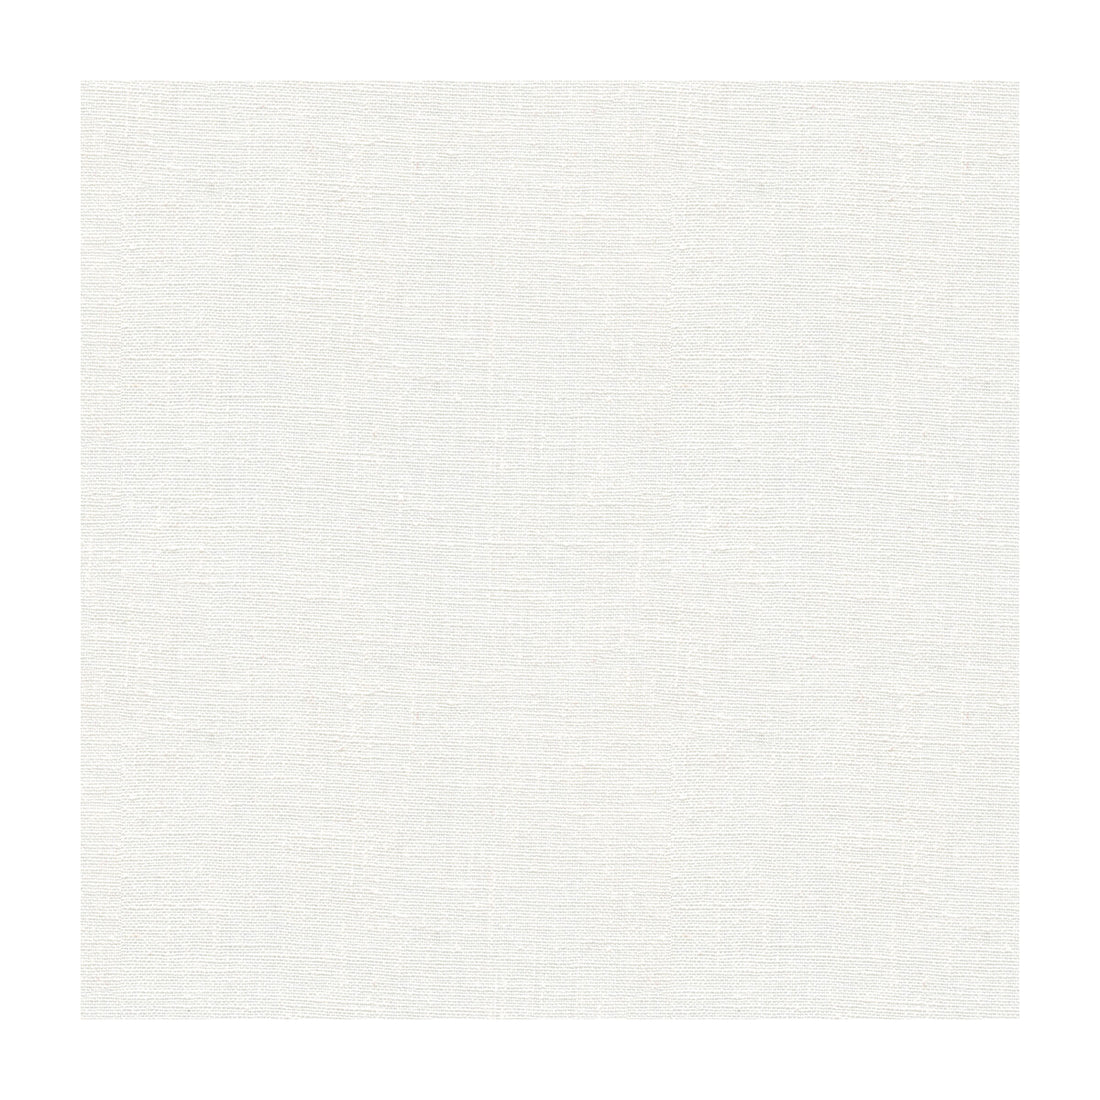 Dublin fabric in white color - pattern 32344.101.0 - by Kravet Basics in the Perfect Plains collection